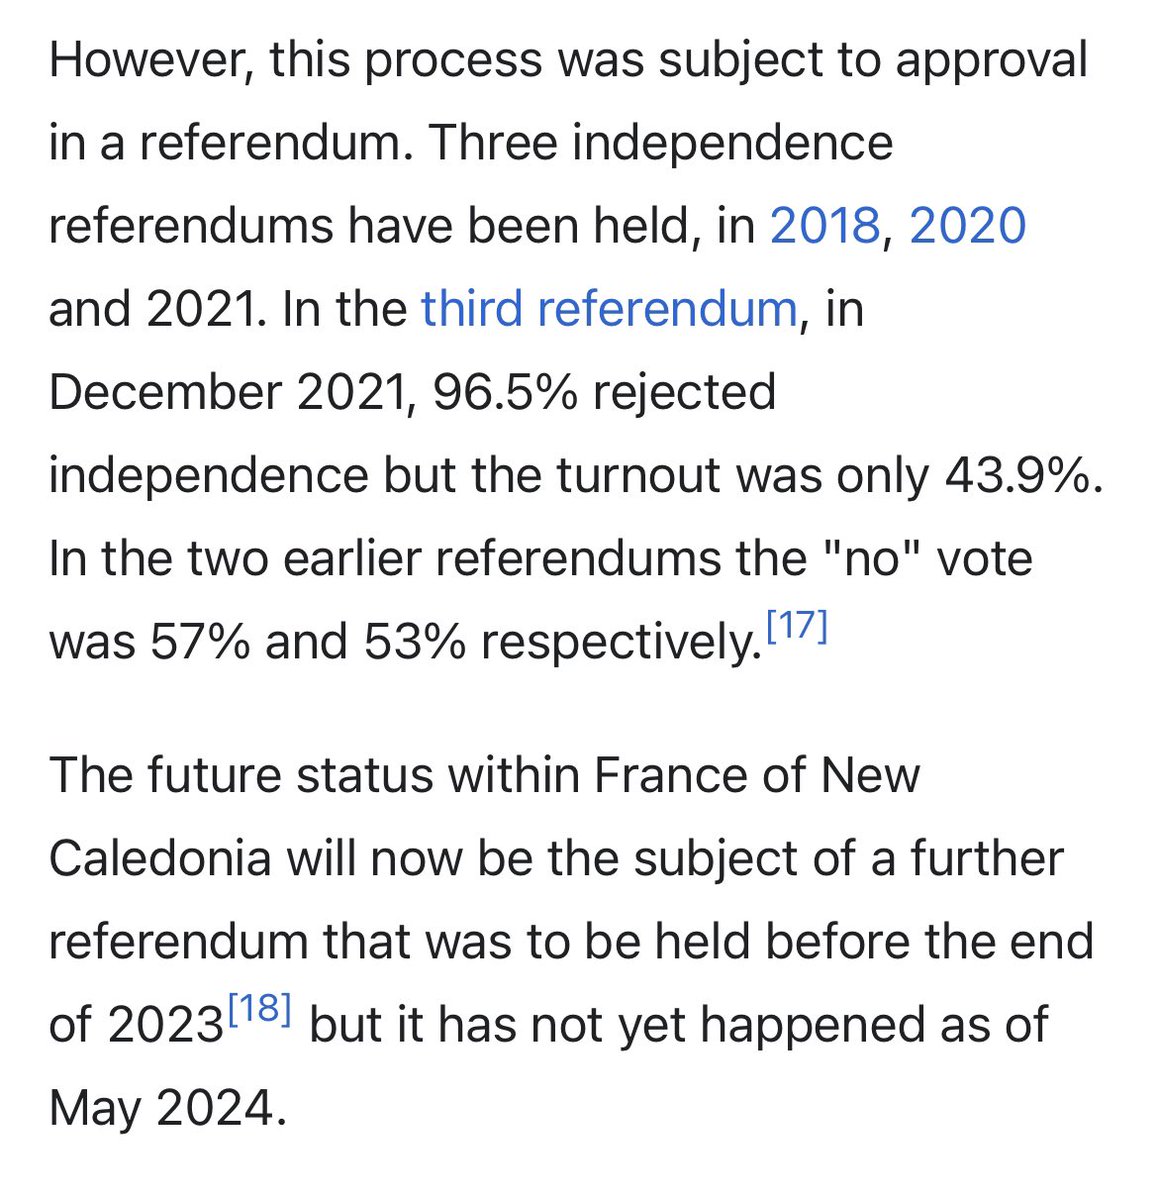 It's funny because France has been trying to get rid of New Caledonia, but New Caledonia rejected independence in three consecutive referenda. Calling them a colony is a joke.